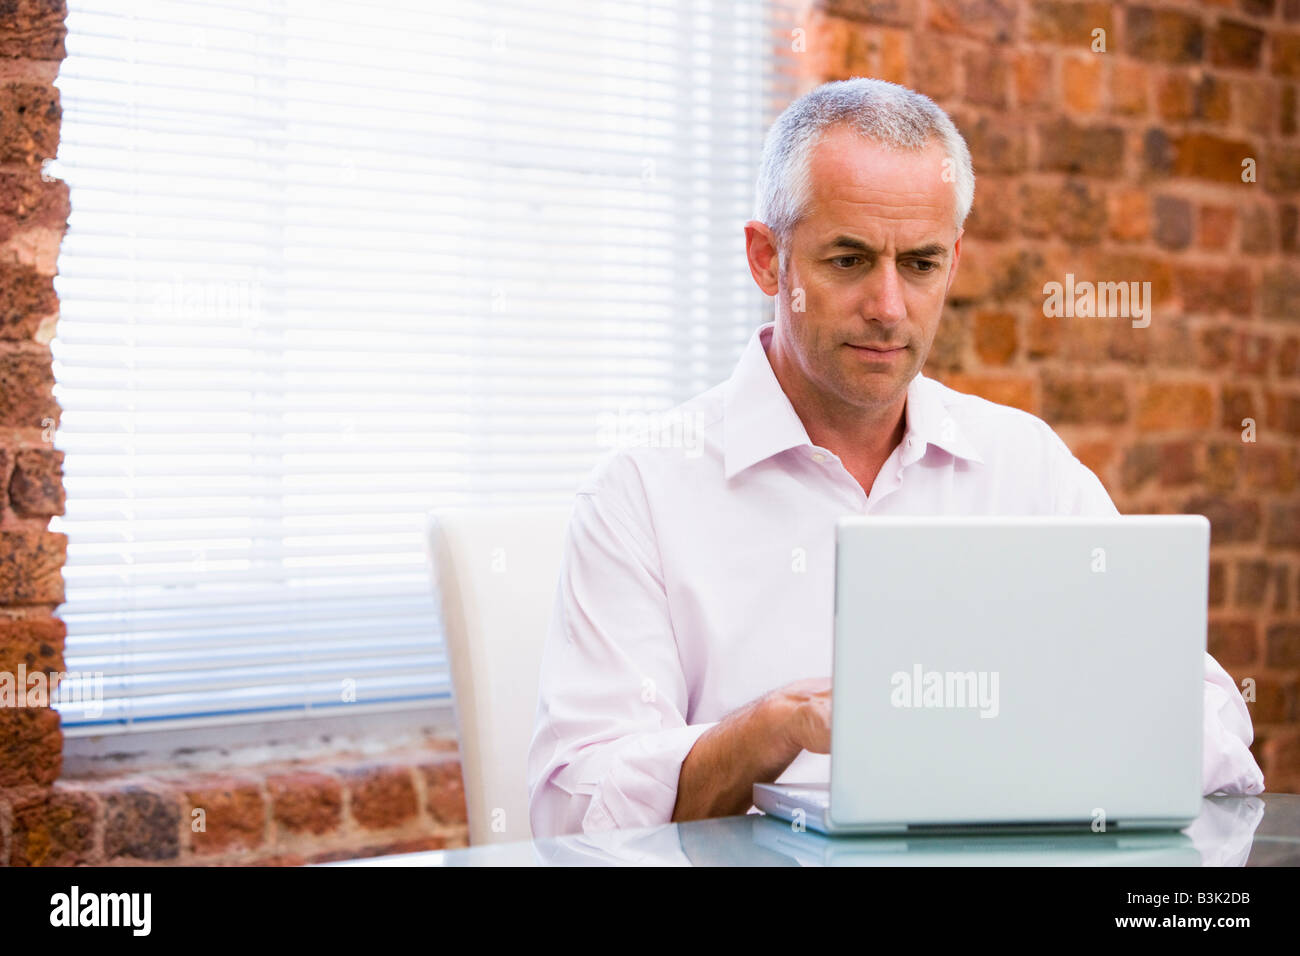 Businessman in office looking at laptop Stock Photo